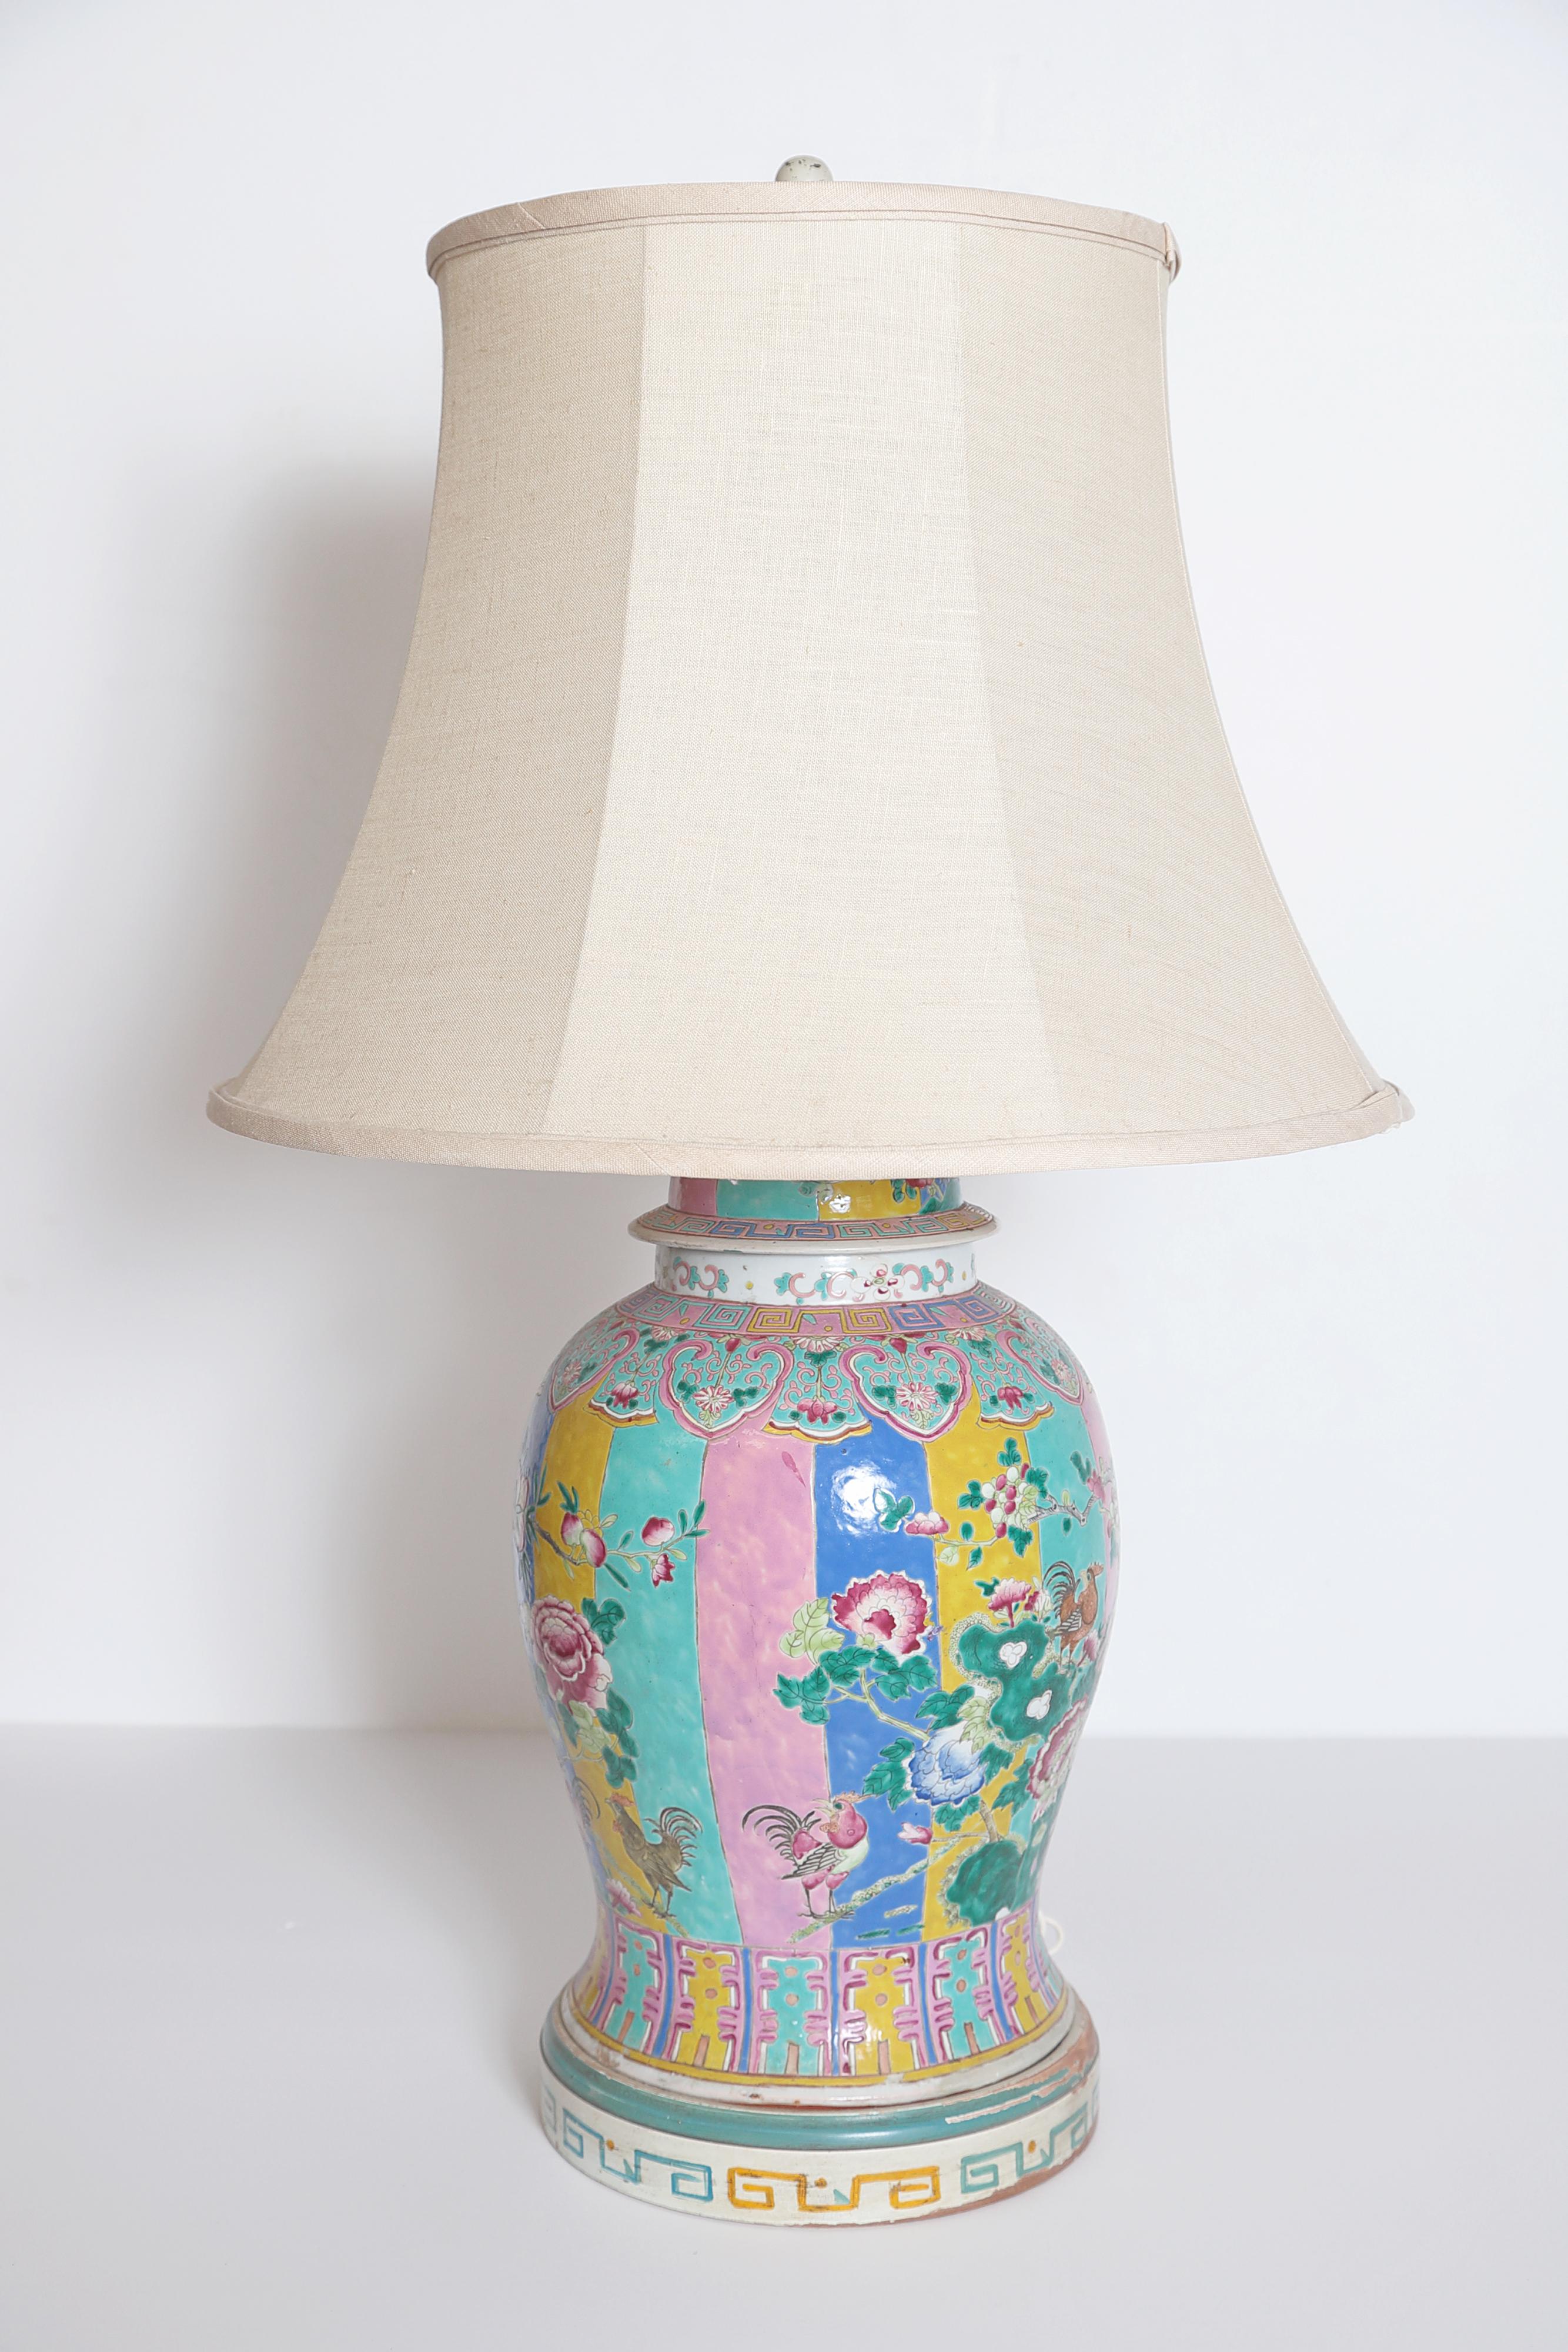 Large Chinese porcelain famille rose ginger jar, drilled as lamp, featuring pastel panels with floral overlay and roosters, custom hand painted base, some losses, chipping and flaking (visible in posted photos), chip to base of ginger jar as well,